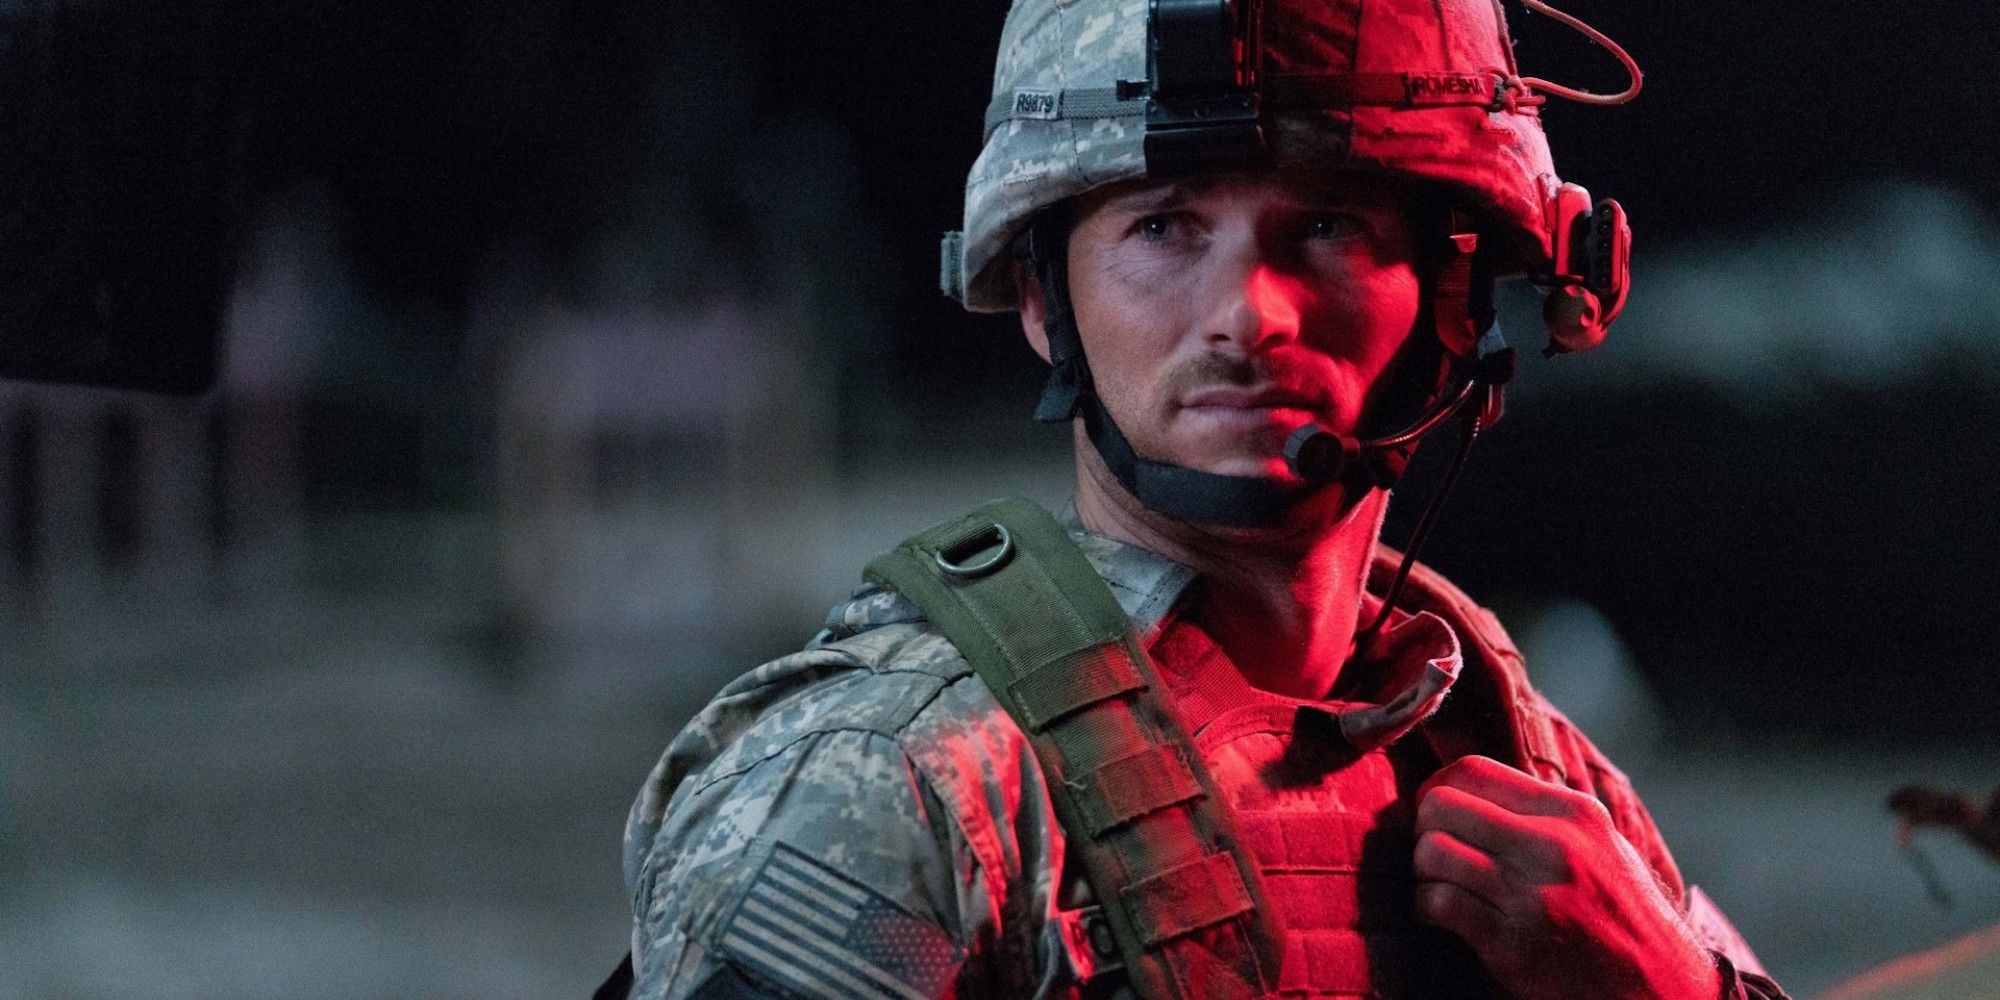 Scott Eastwood in military helmet at night in The Outpost